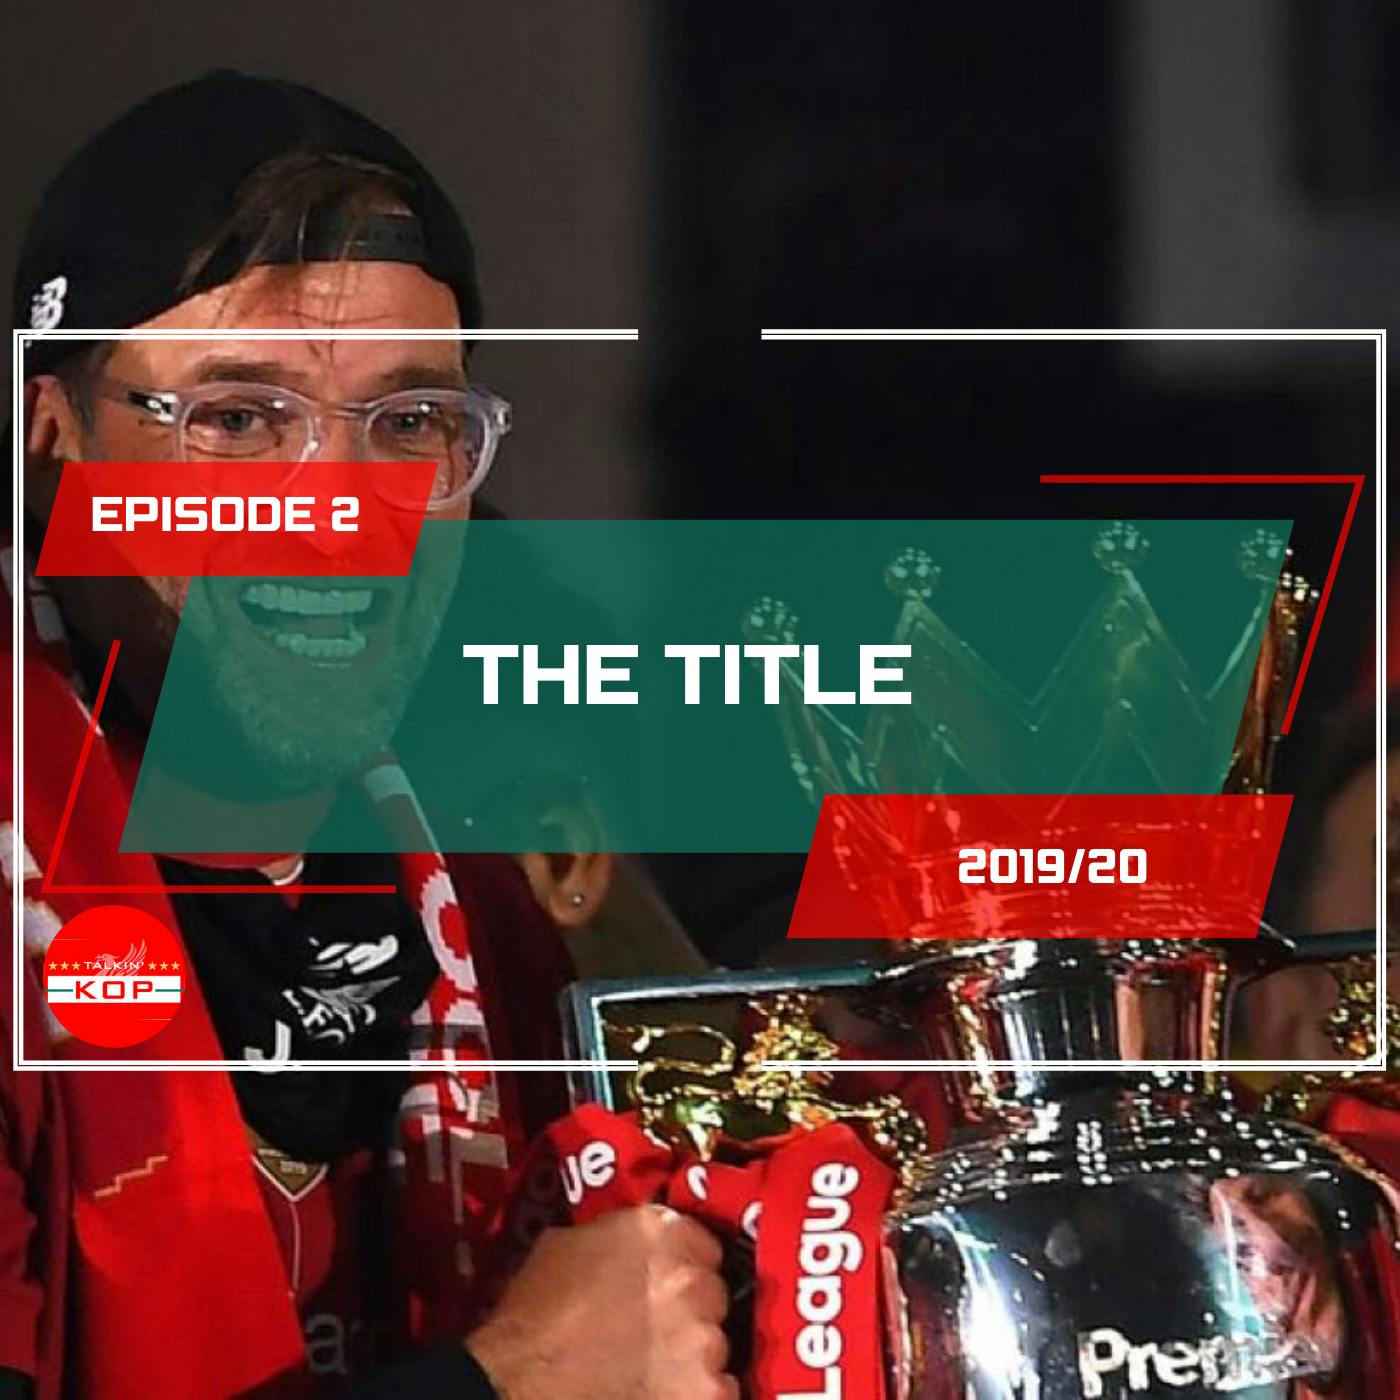 The Title | Episode 2 | 2019/20